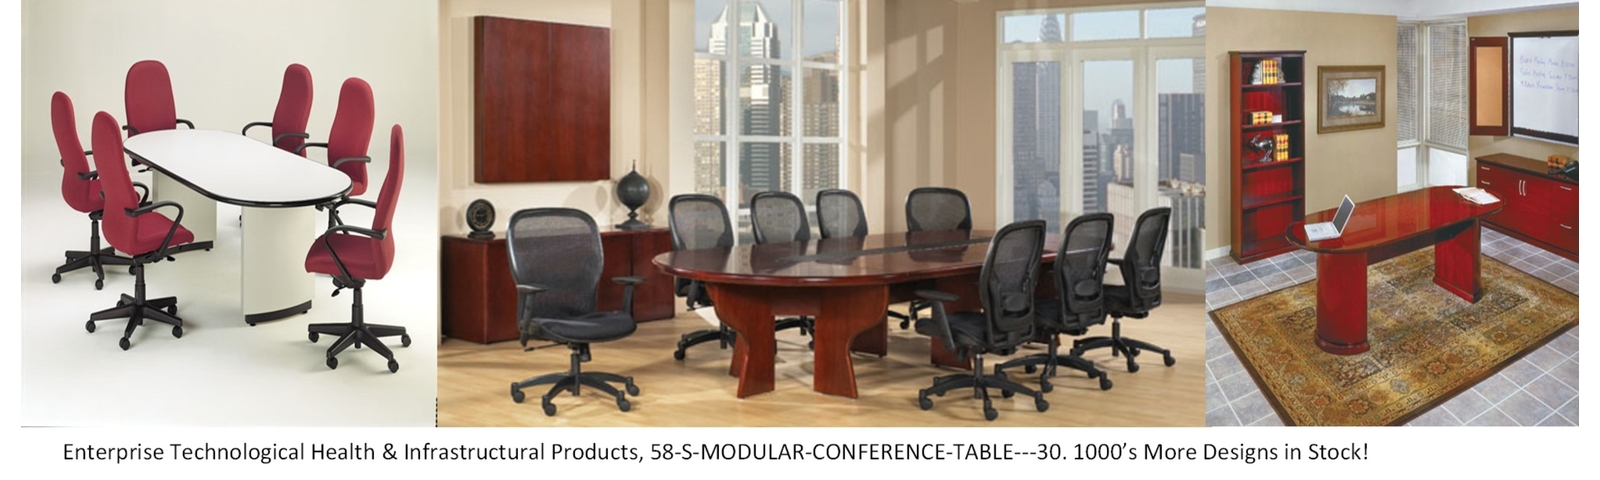 58-S-MODULAR-CONFERENCE-TABLE---30